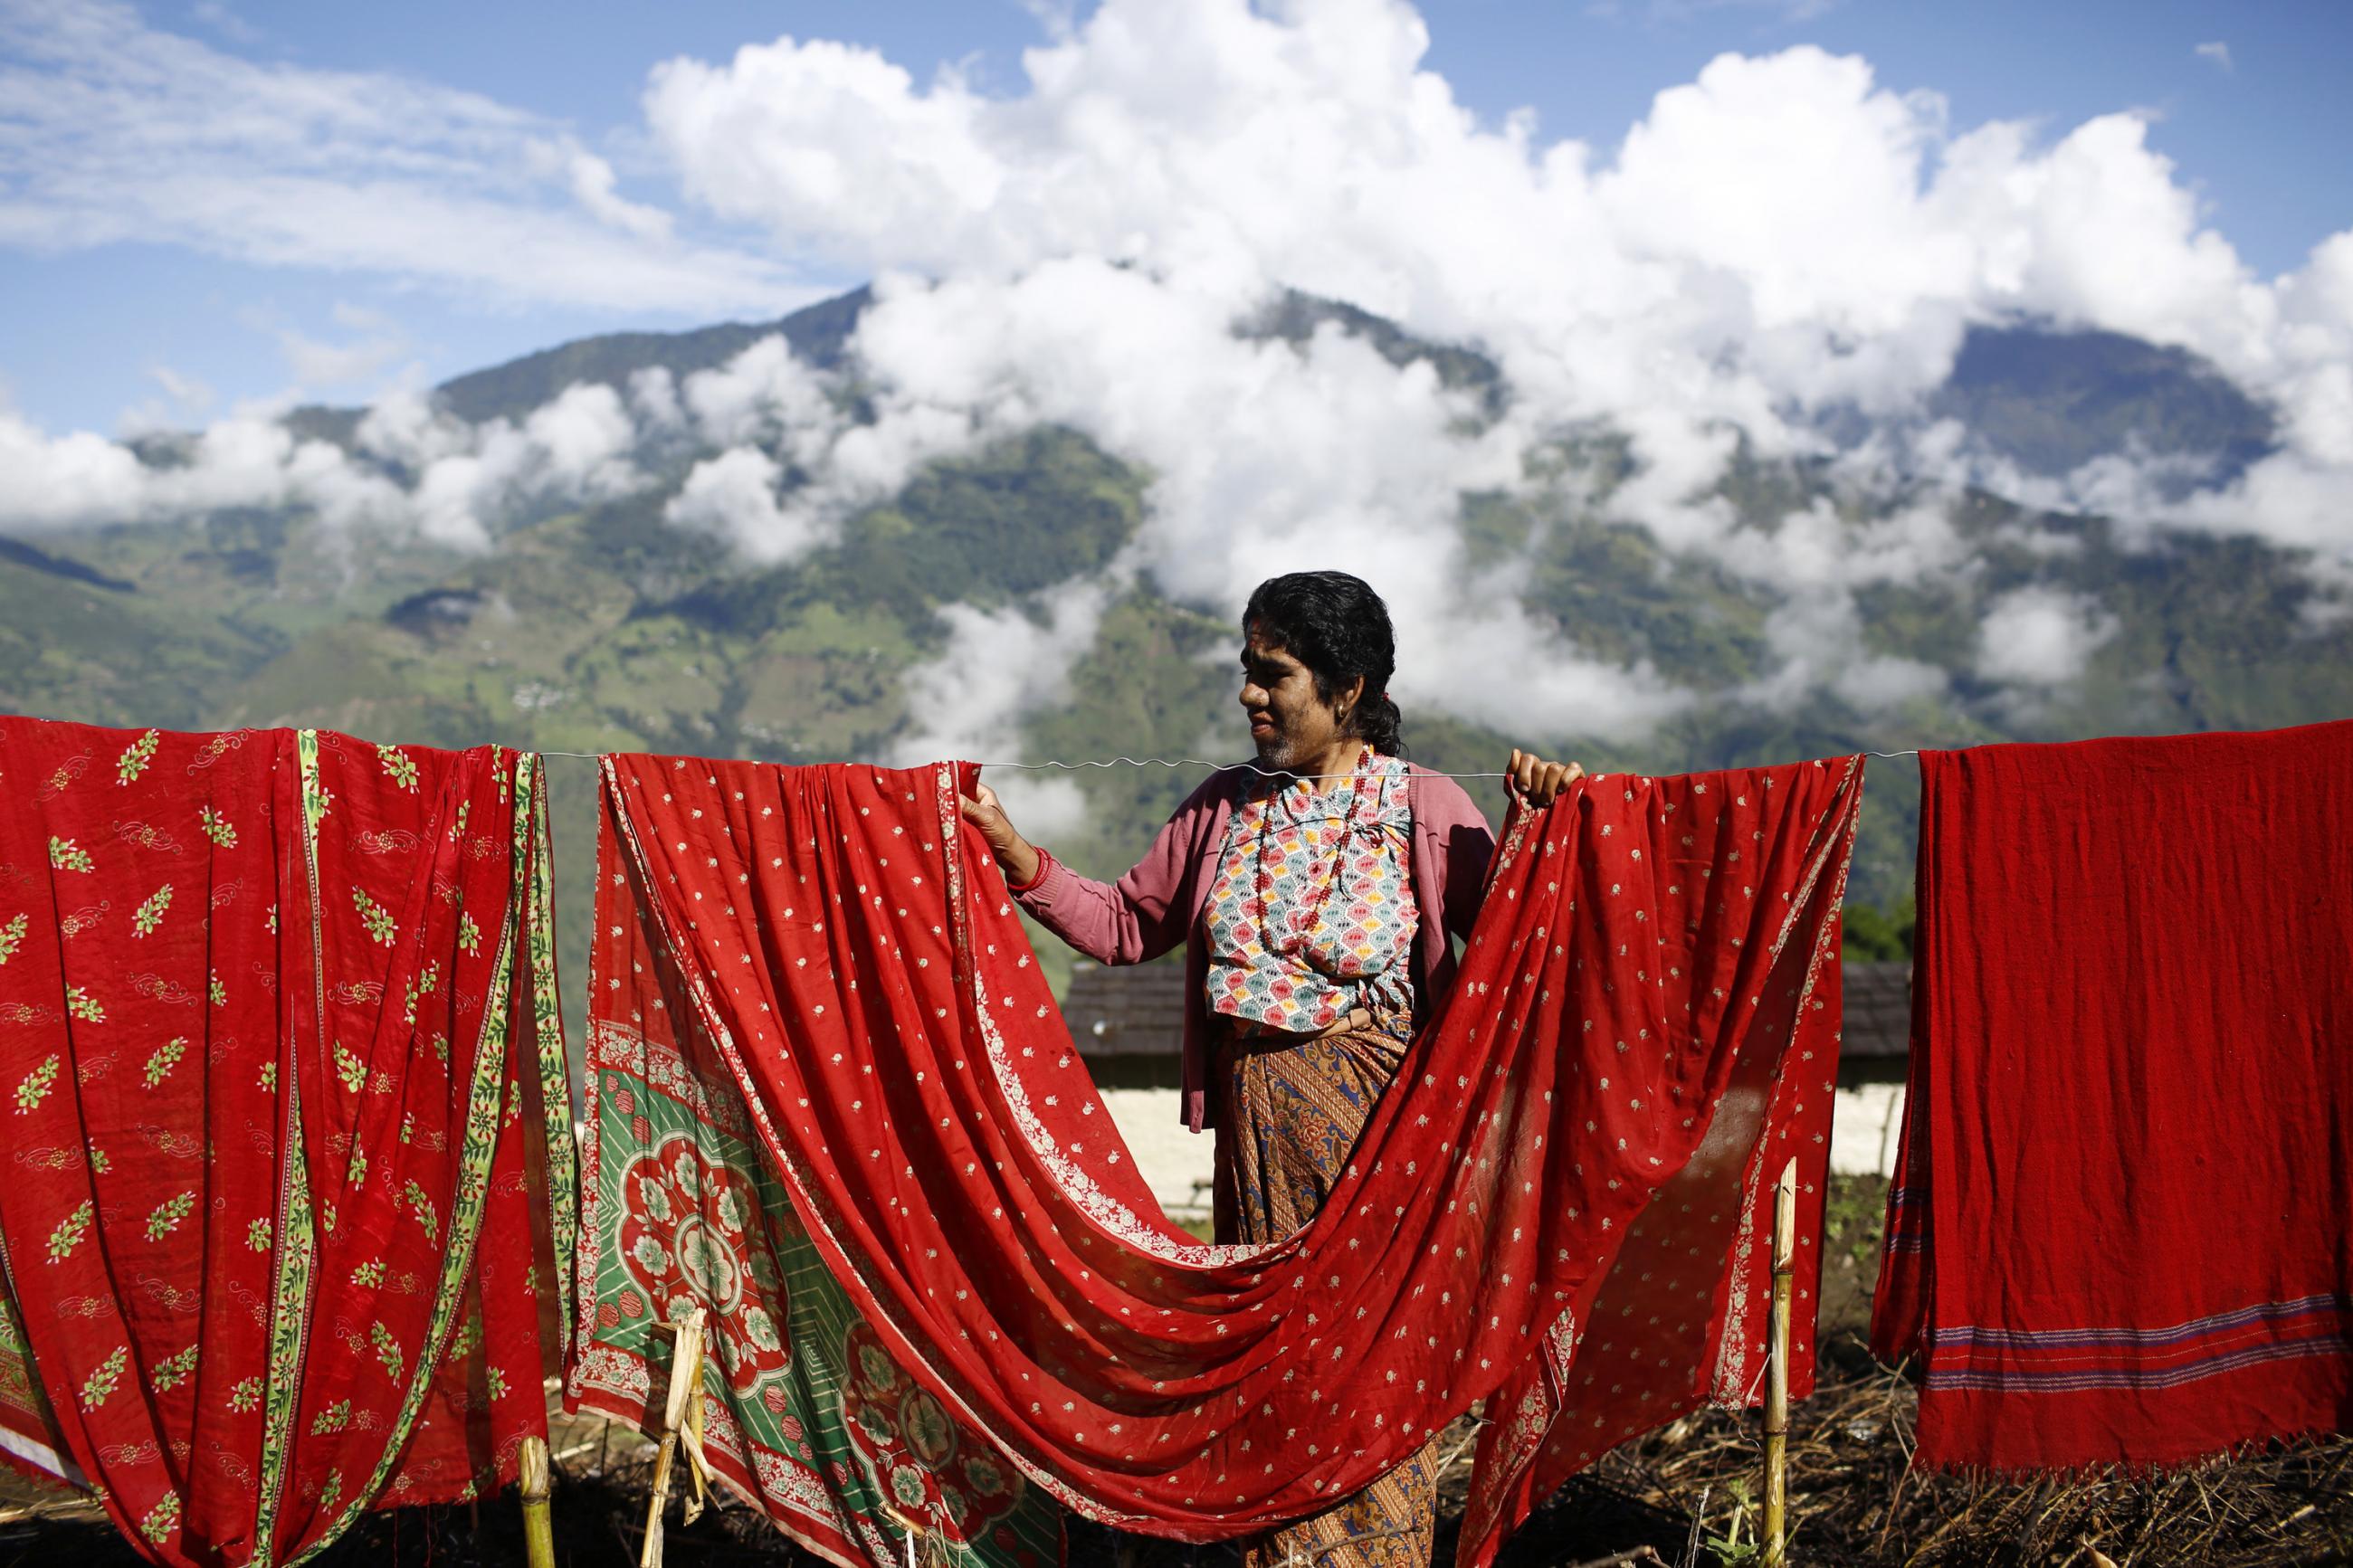 Devi Budhathoki, 38, hangs beautiful red fabric on a clothesline outside her house against a background of green mountains and fluffy white clouds and in Kharay, Dolkha District, 190 km (118 miles) northeast of Kathmandu September 15, 2013.